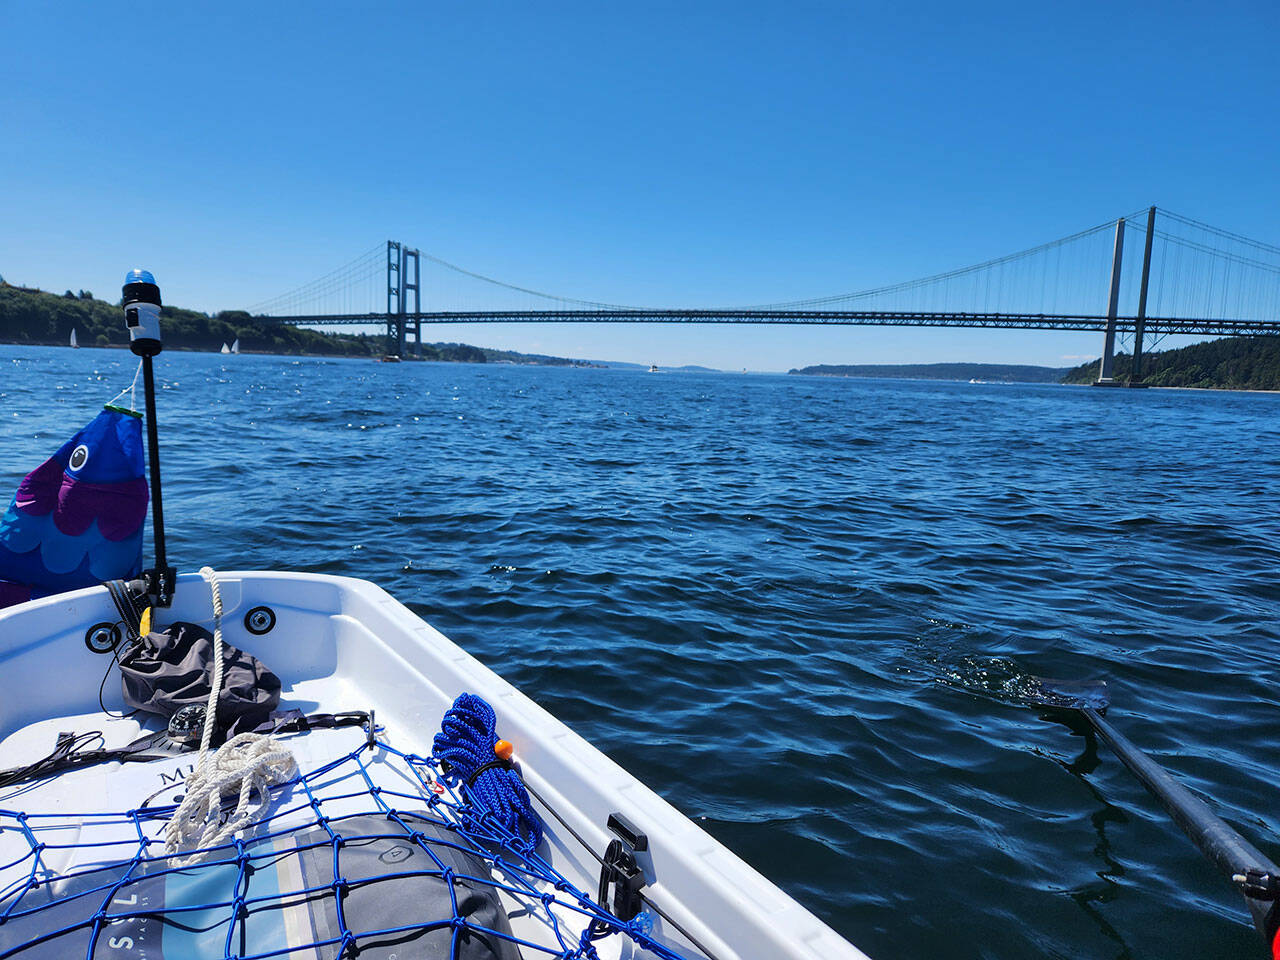 Part of Susan’s journey included going under the Tacoma Narrows Bridge.